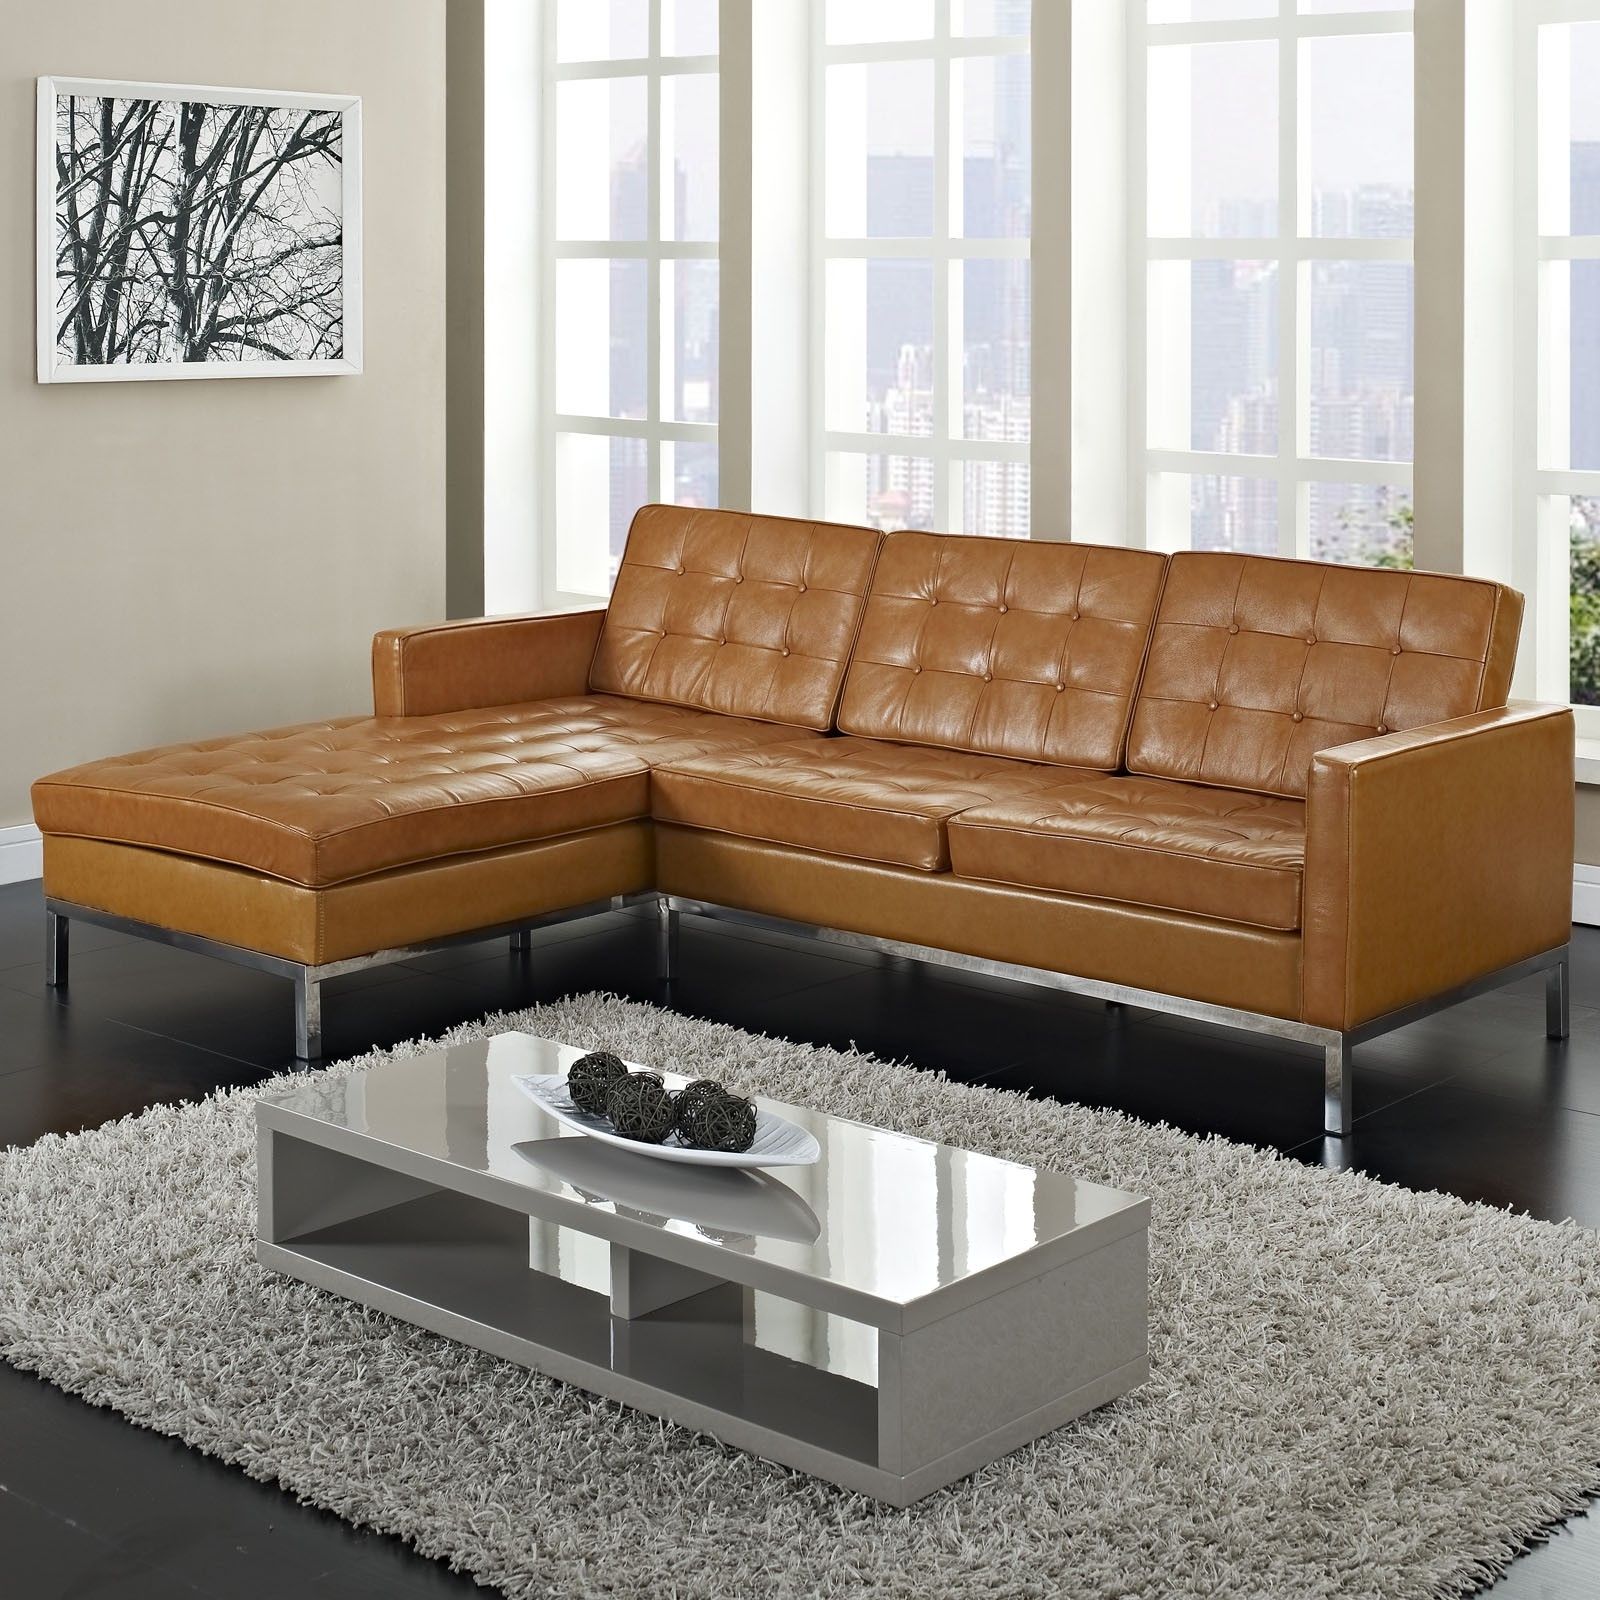 Most Recently Released Furniture, Maximizing Small Living Room Spaces With 3 Piece Brown Within Leather Sofas With Storage (View 15 of 20)